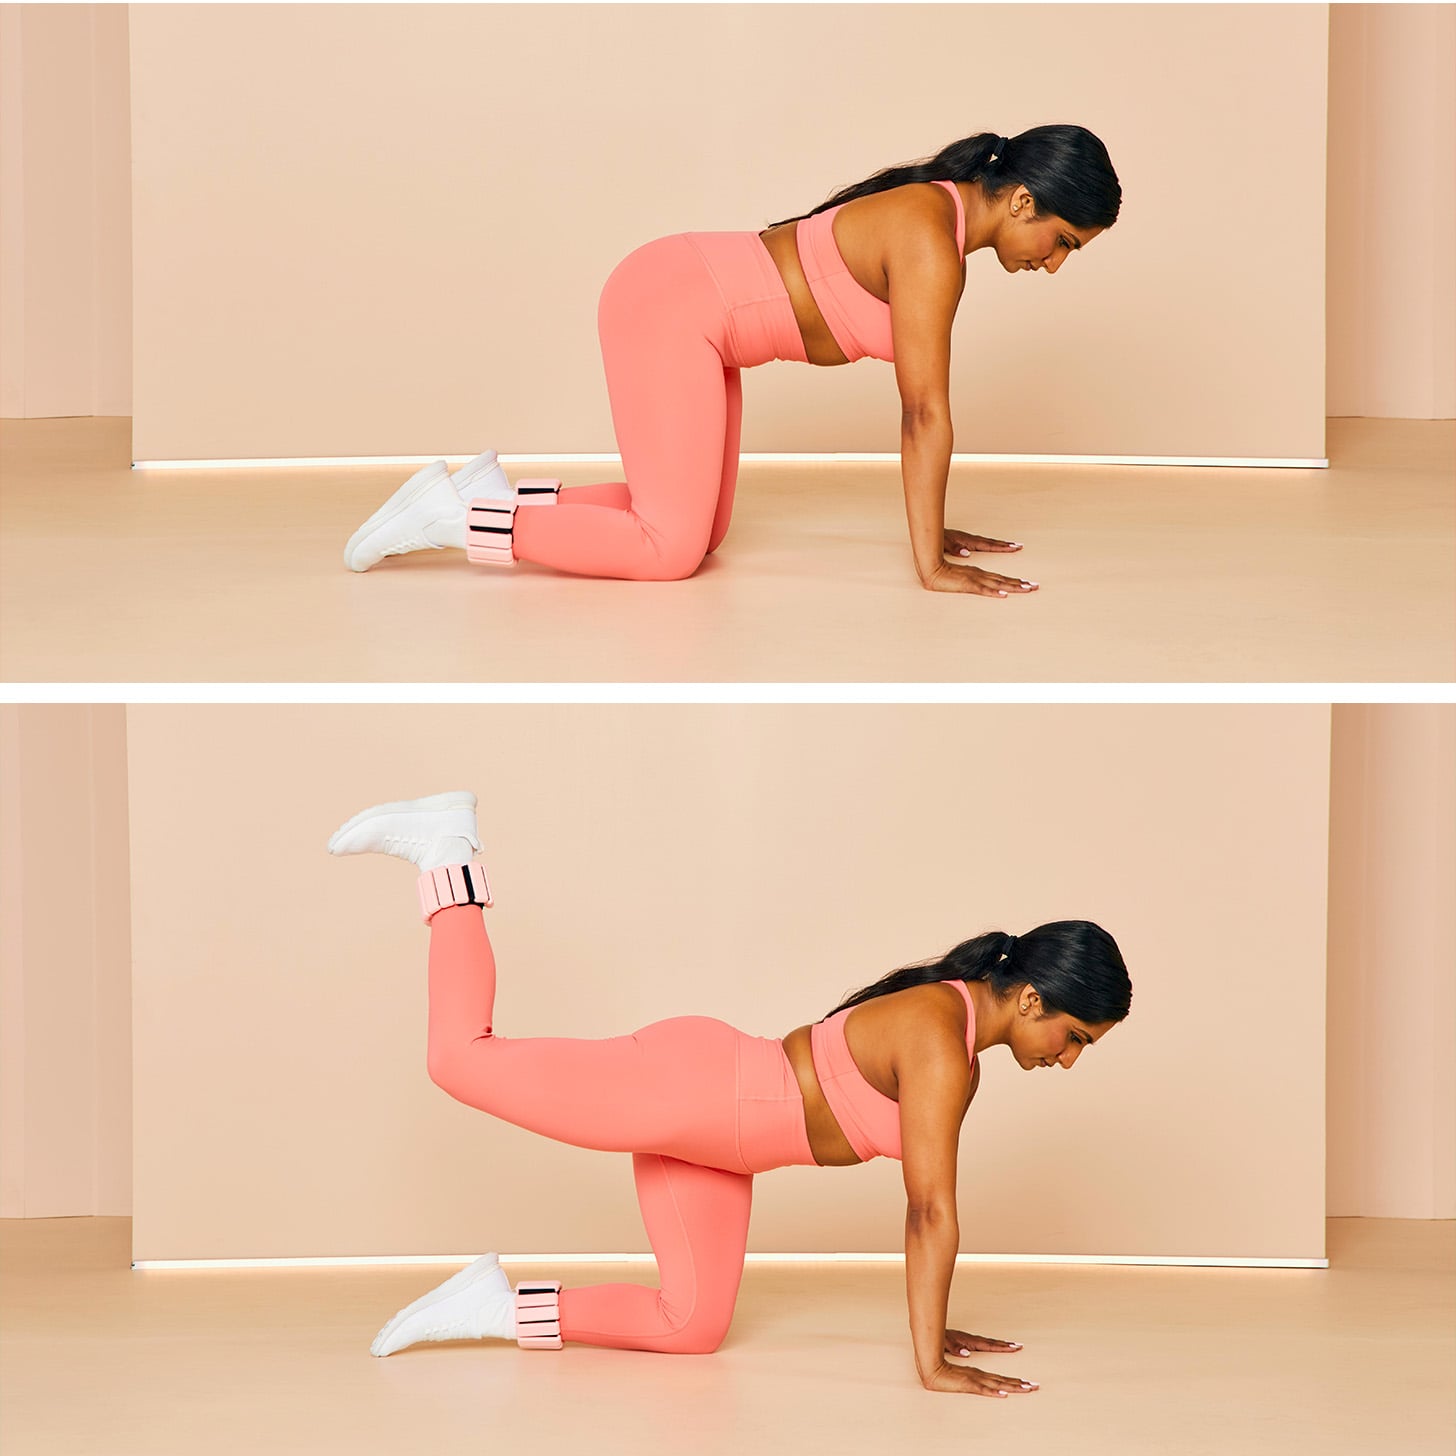 Get a bigger booty - glute exercises